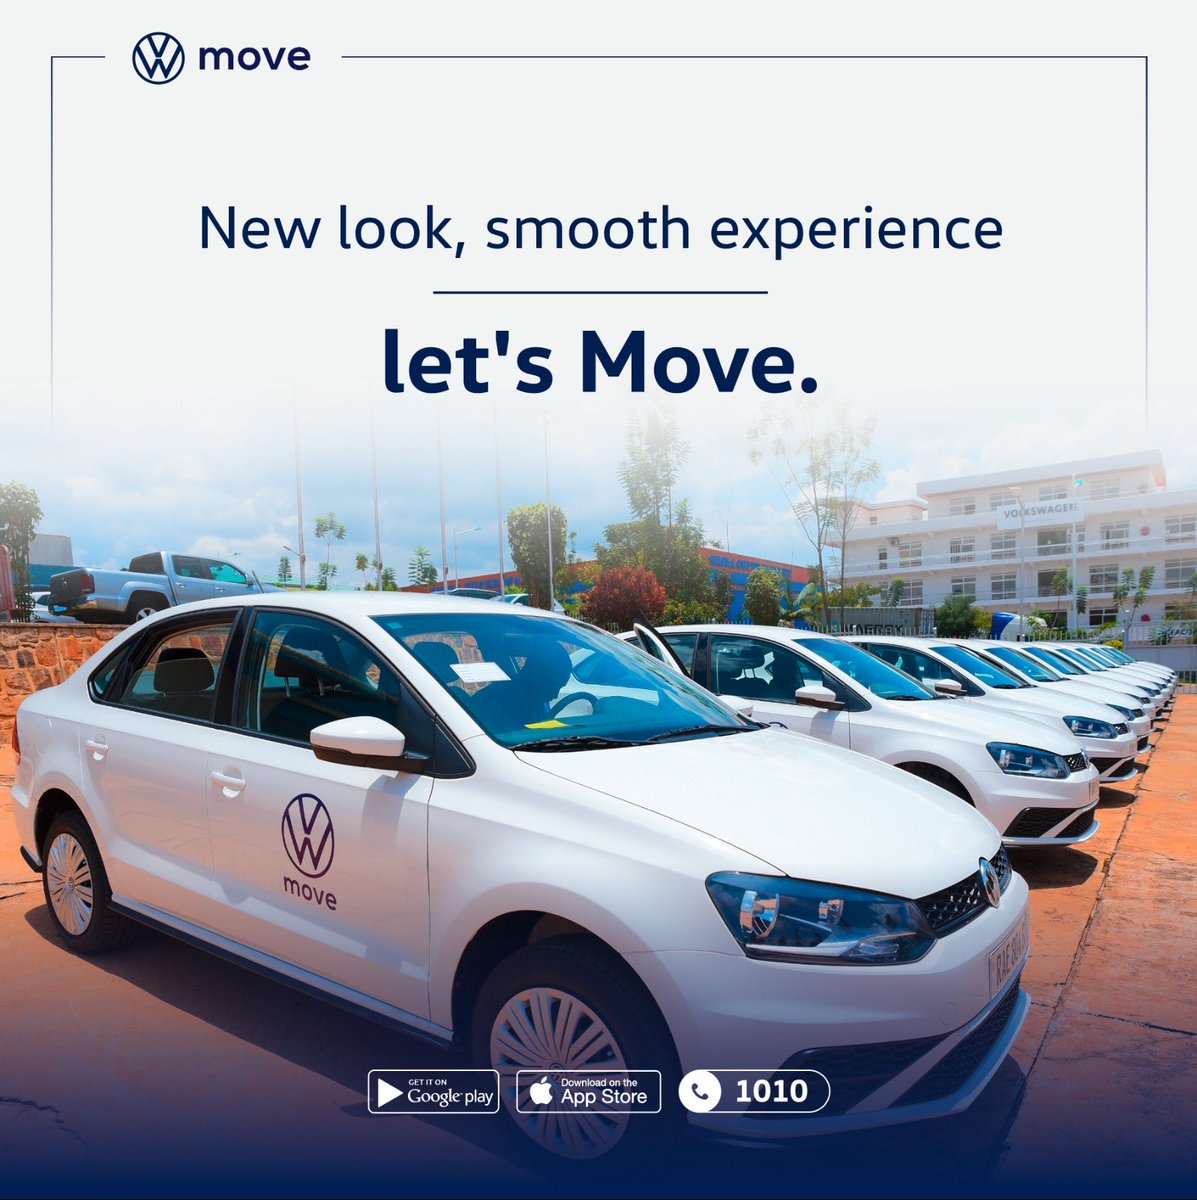 Get ready for a seamless ride with our new sedan model. Book now and experience the difference #MoveWithUs